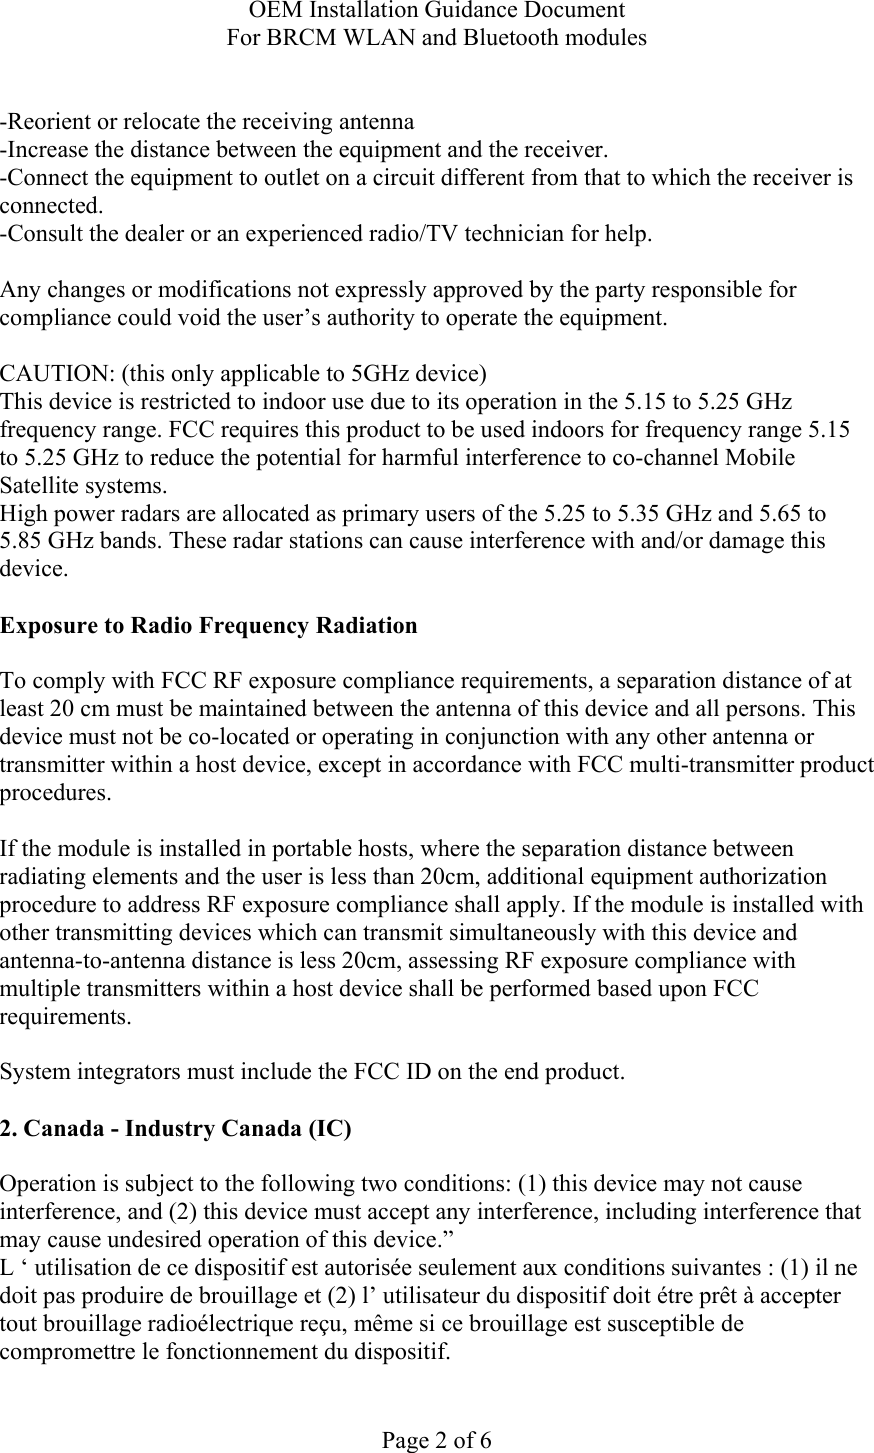 OEM Installation Guidance Document For BRCM WLAN and Bluetooth modules  Page 2 of 6  -Reorient or relocate the receiving antenna -Increase the distance between the equipment and the receiver. -Connect the equipment to outlet on a circuit different from that to which the receiver is connected. -Consult the dealer or an experienced radio/TV technician for help.  Any changes or modifications not expressly approved by the party responsible for compliance could void the user’s authority to operate the equipment.  CAUTION: (this only applicable to 5GHz device) This device is restricted to indoor use due to its operation in the 5.15 to 5.25 GHz frequency range. FCC requires this product to be used indoors for frequency range 5.15 to 5.25 GHz to reduce the potential for harmful interference to co-channel Mobile Satellite systems. High power radars are allocated as primary users of the 5.25 to 5.35 GHz and 5.65 to 5.85 GHz bands. These radar stations can cause interference with and/or damage this device.  Exposure to Radio Frequency Radiation  To comply with FCC RF exposure compliance requirements, a separation distance of at least 20 cm must be maintained between the antenna of this device and all persons. This device must not be co-located or operating in conjunction with any other antenna or transmitter within a host device, except in accordance with FCC multi-transmitter product procedures.  If the module is installed in portable hosts, where the separation distance between radiating elements and the user is less than 20cm, additional equipment authorization procedure to address RF exposure compliance shall apply. If the module is installed with other transmitting devices which can transmit simultaneously with this device and antenna-to-antenna distance is less 20cm, assessing RF exposure compliance with multiple transmitters within a host device shall be performed based upon FCC requirements.   System integrators must include the FCC ID on the end product.   2. Canada - Industry Canada (IC)  Operation is subject to the following two conditions: (1) this device may not cause interference, and (2) this device must accept any interference, including interference that may cause undesired operation of this device.” L ‘ utilisation de ce dispositif est autorisée seulement aux conditions suivantes : (1) il ne doit pas produire de brouillage et (2) l’ utilisateur du dispositif doit étre prêt à accepter tout brouillage radioélectrique reçu, même si ce brouillage est susceptible de compromettre le fonctionnement du dispositif. 